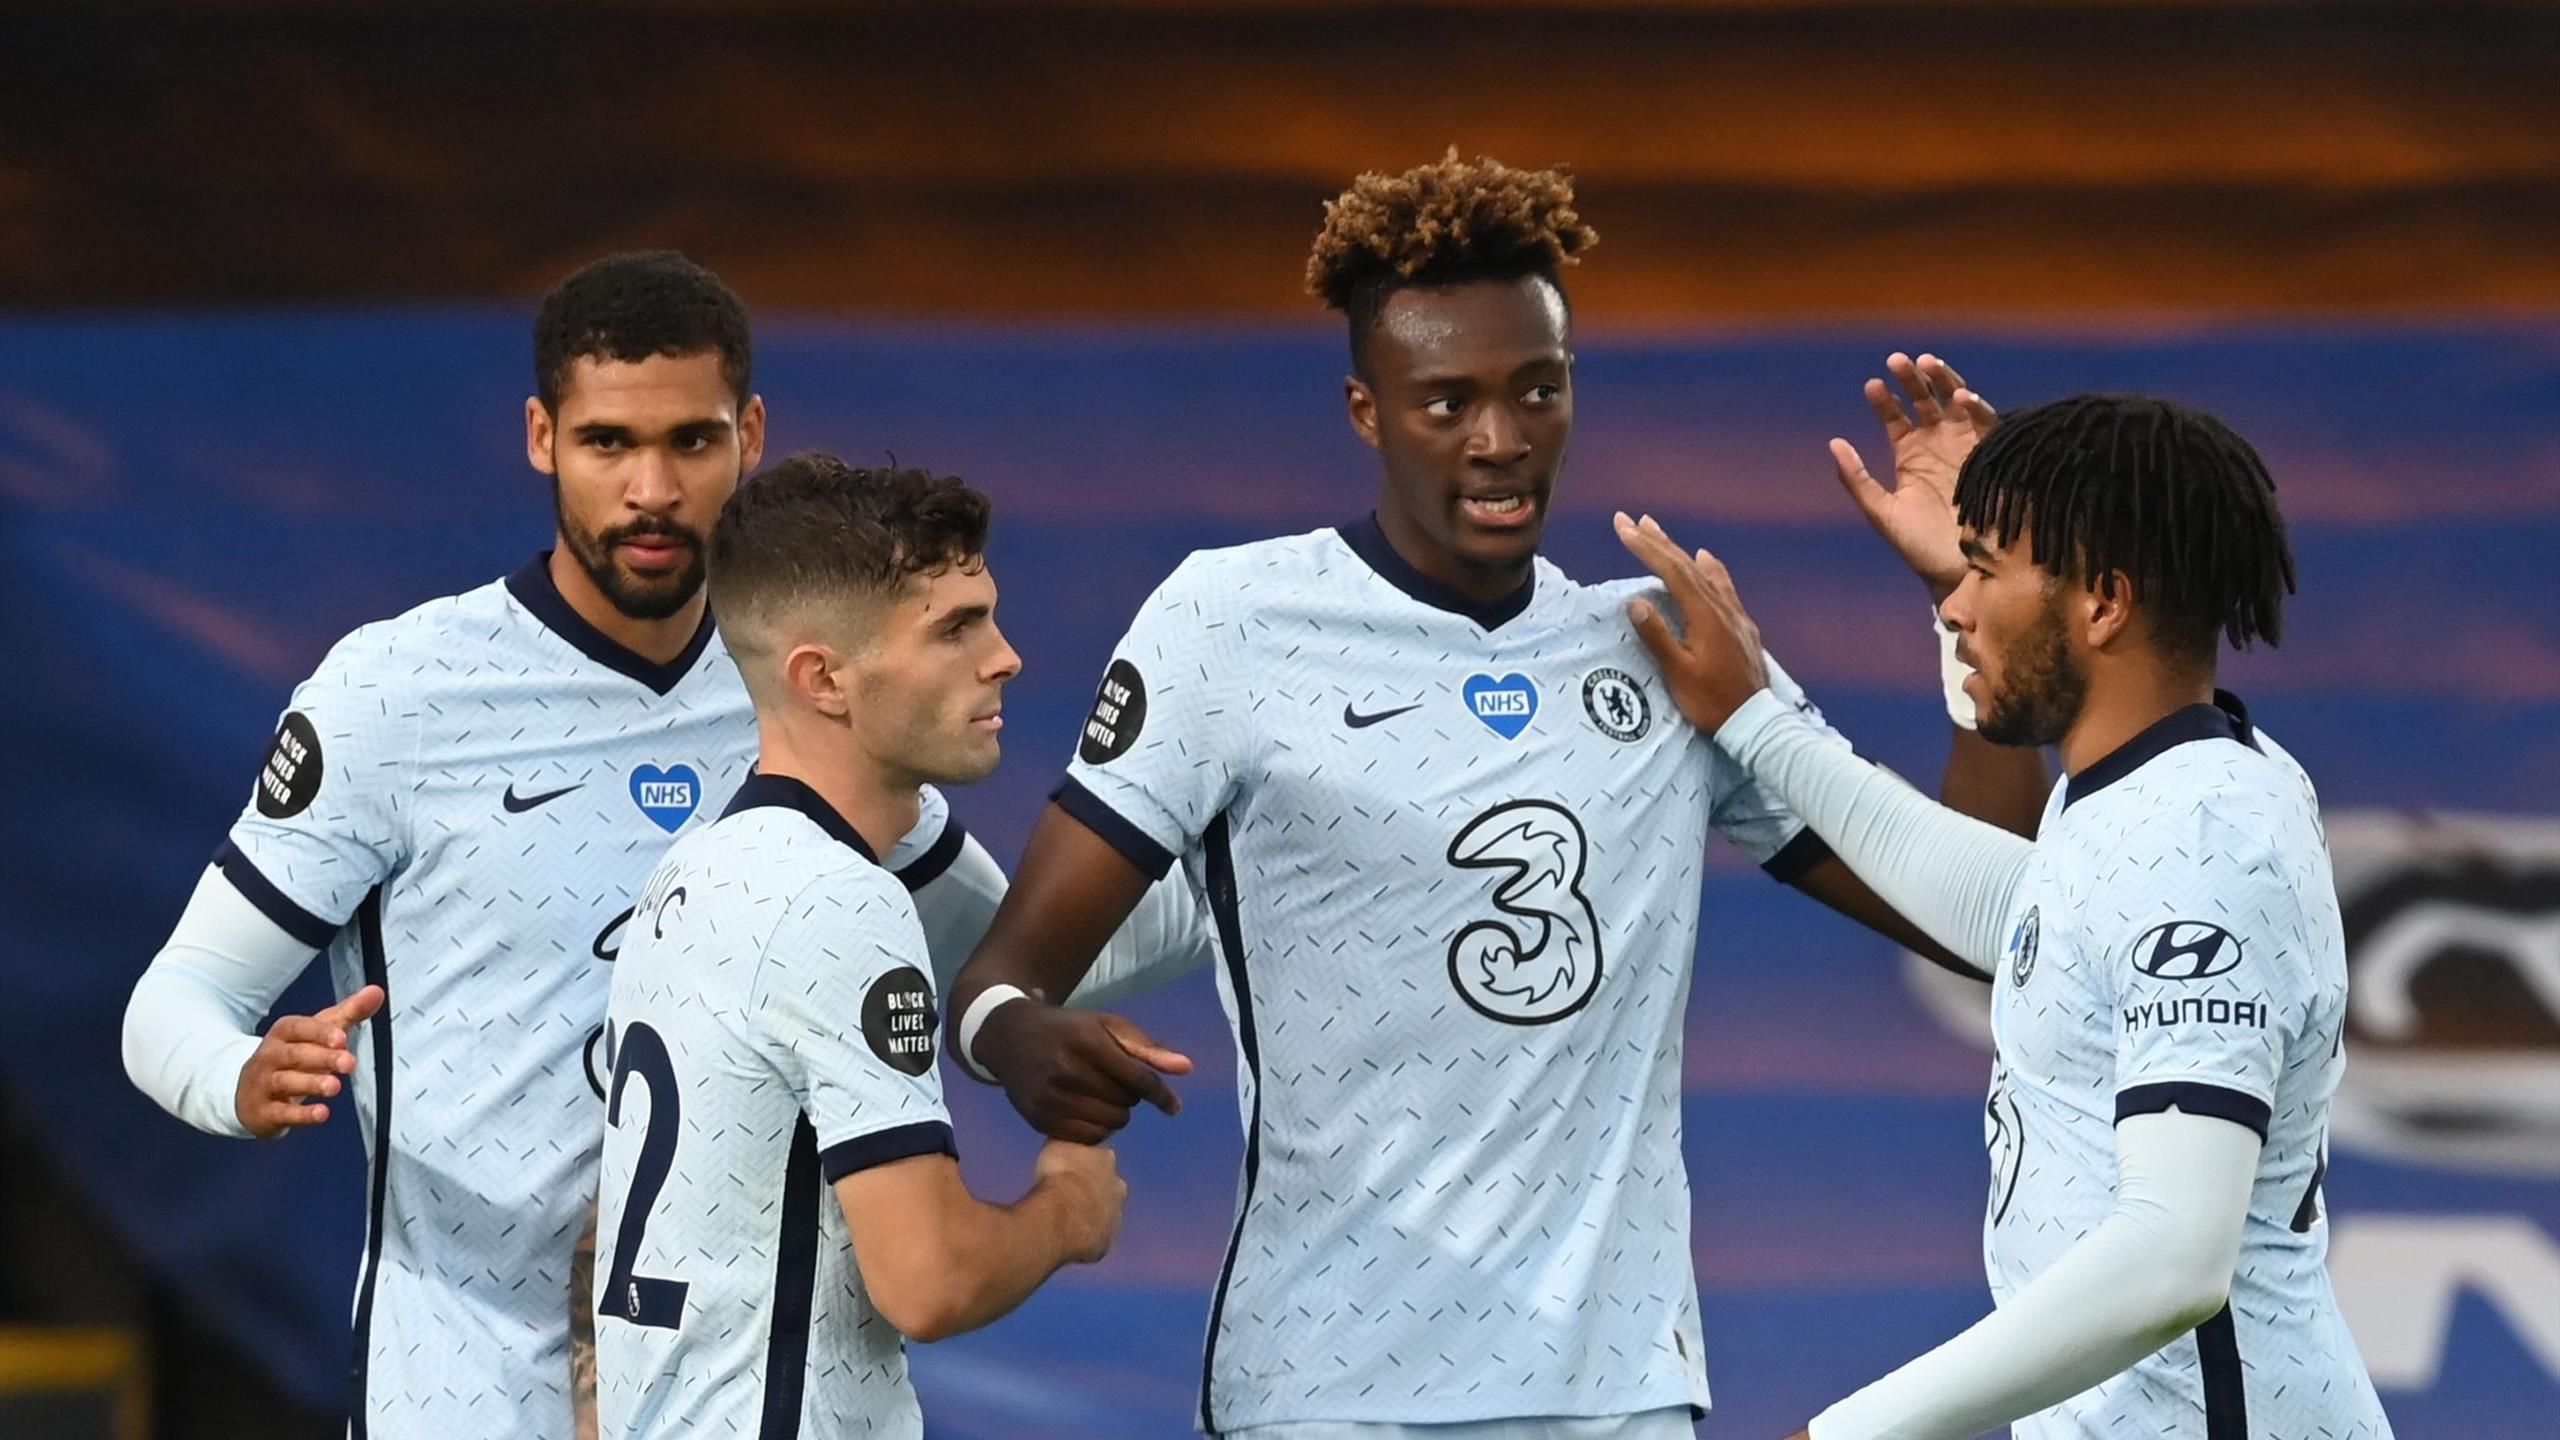 Tammy Abraham ends drought as Chelsea edge Palace in thriller and move into third